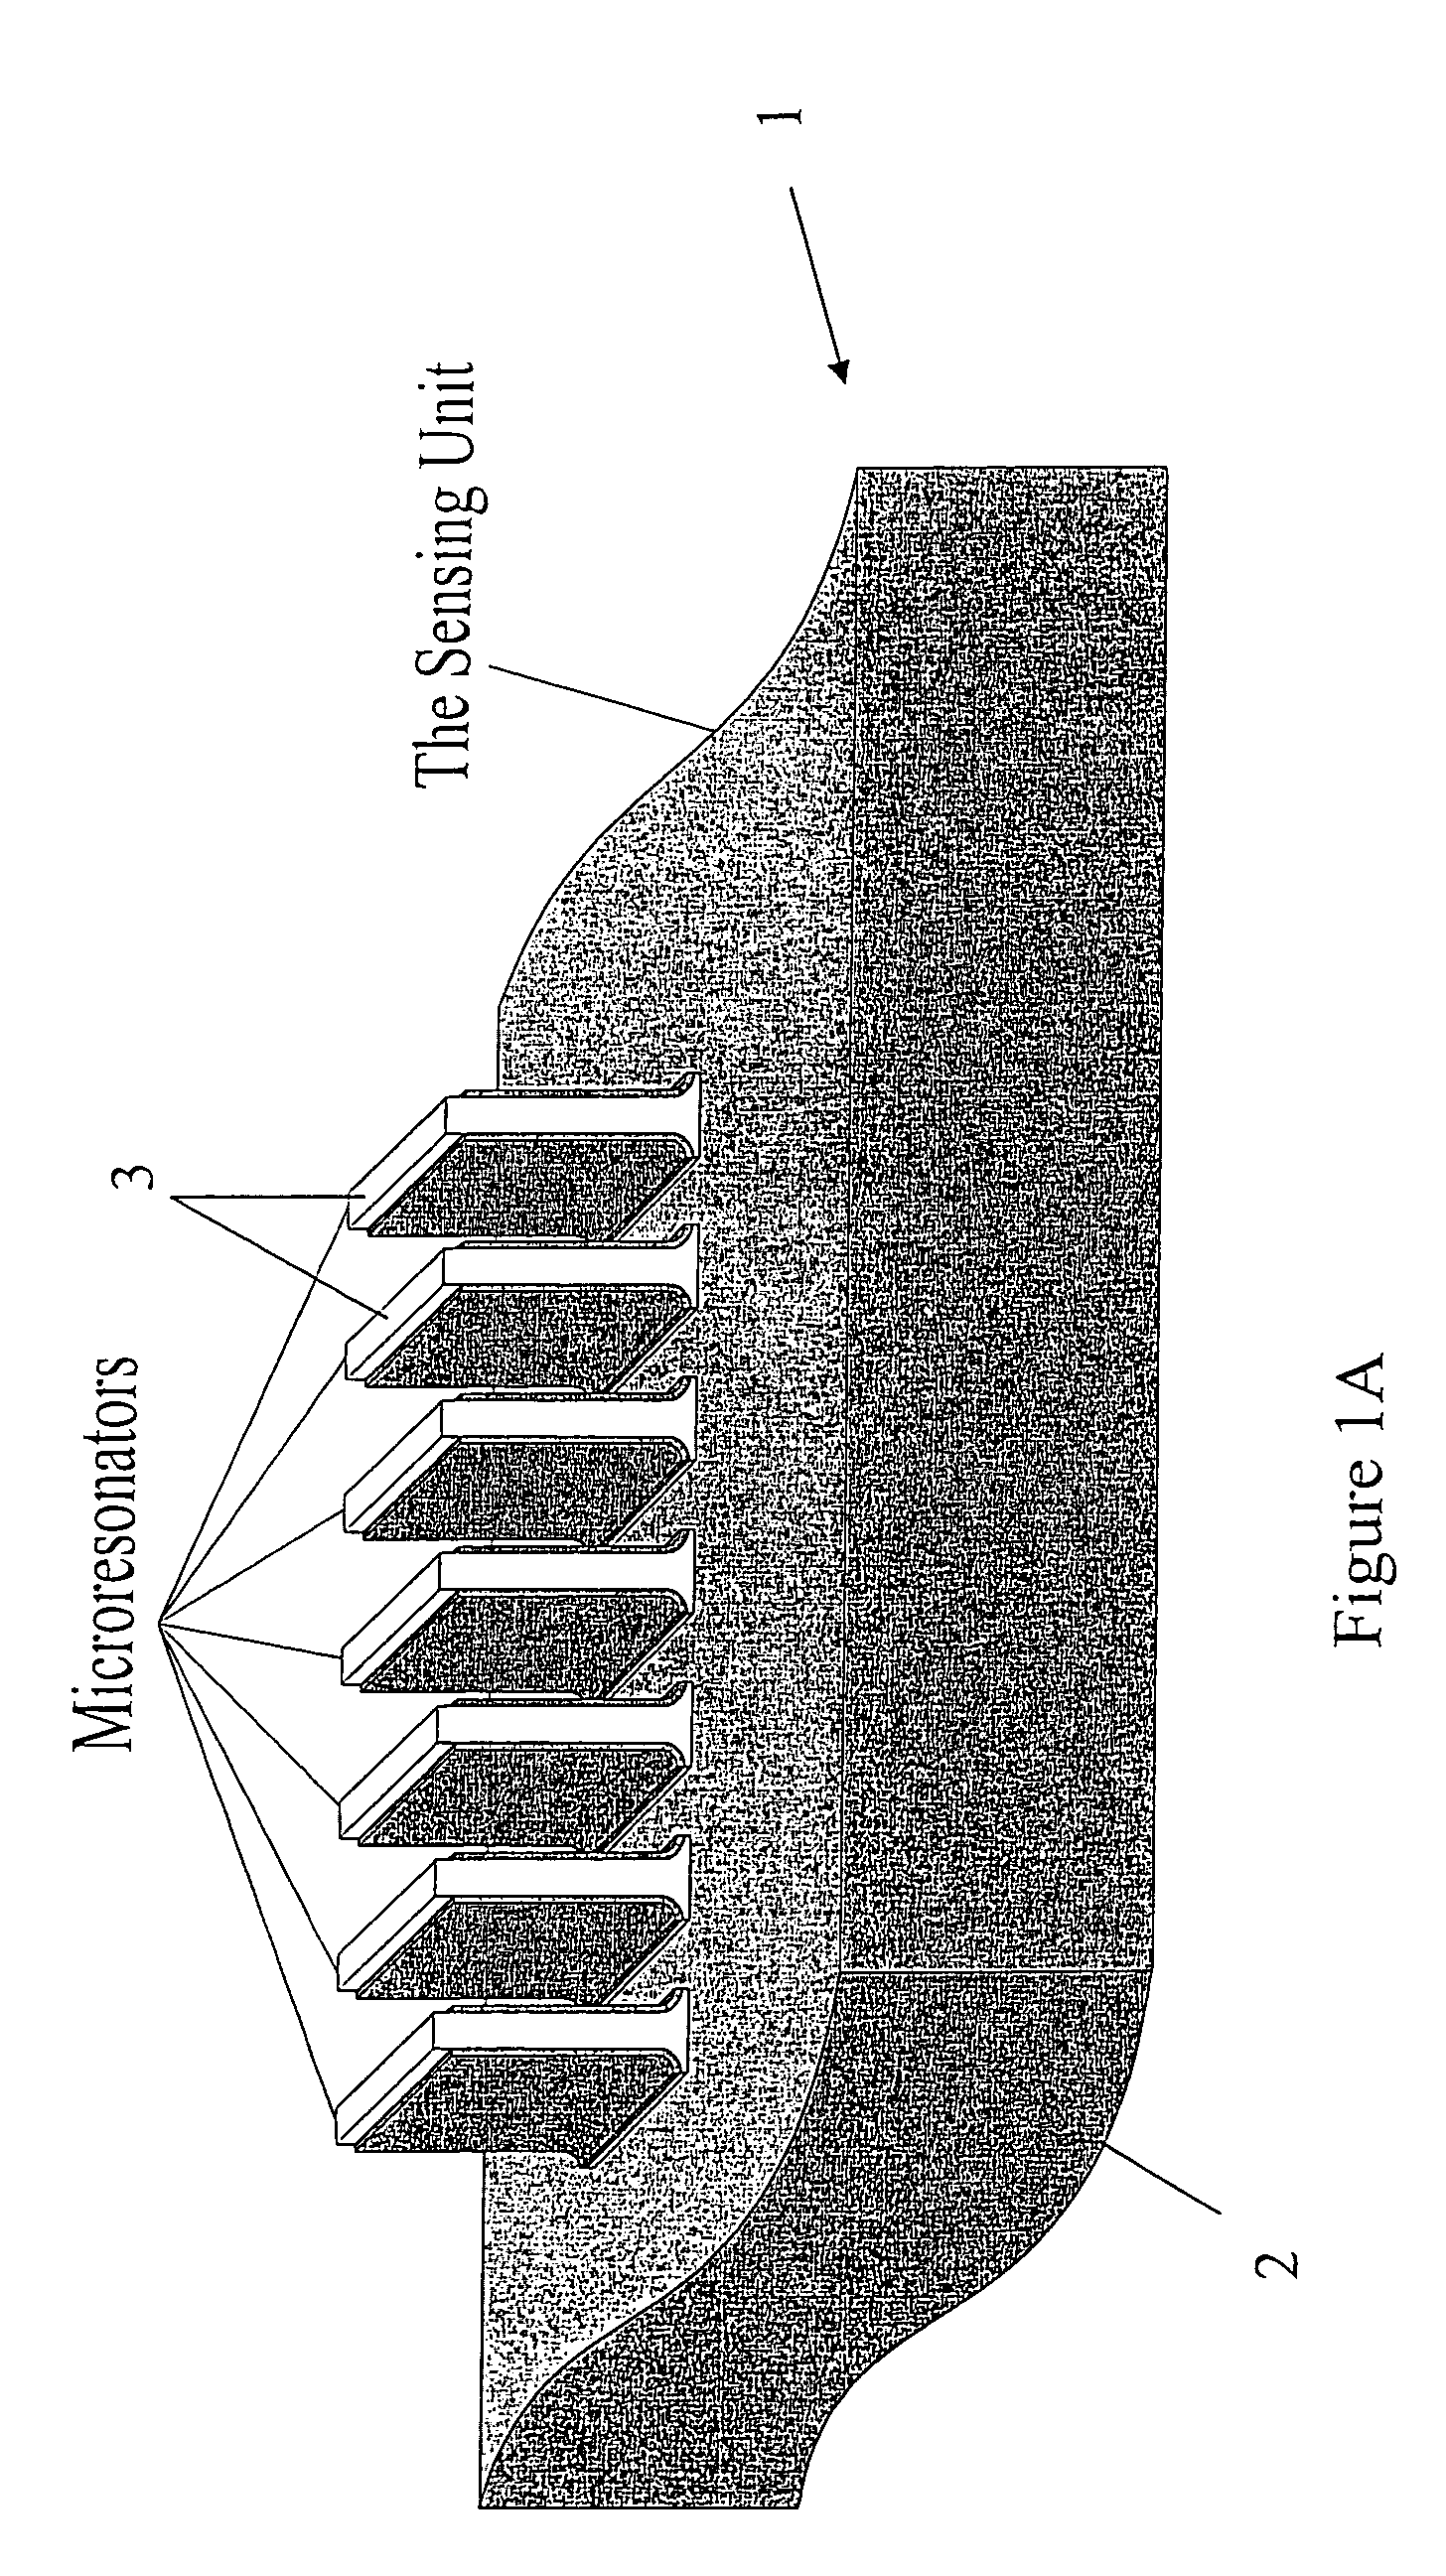 Methodology and apparatus for the detection of biological substances